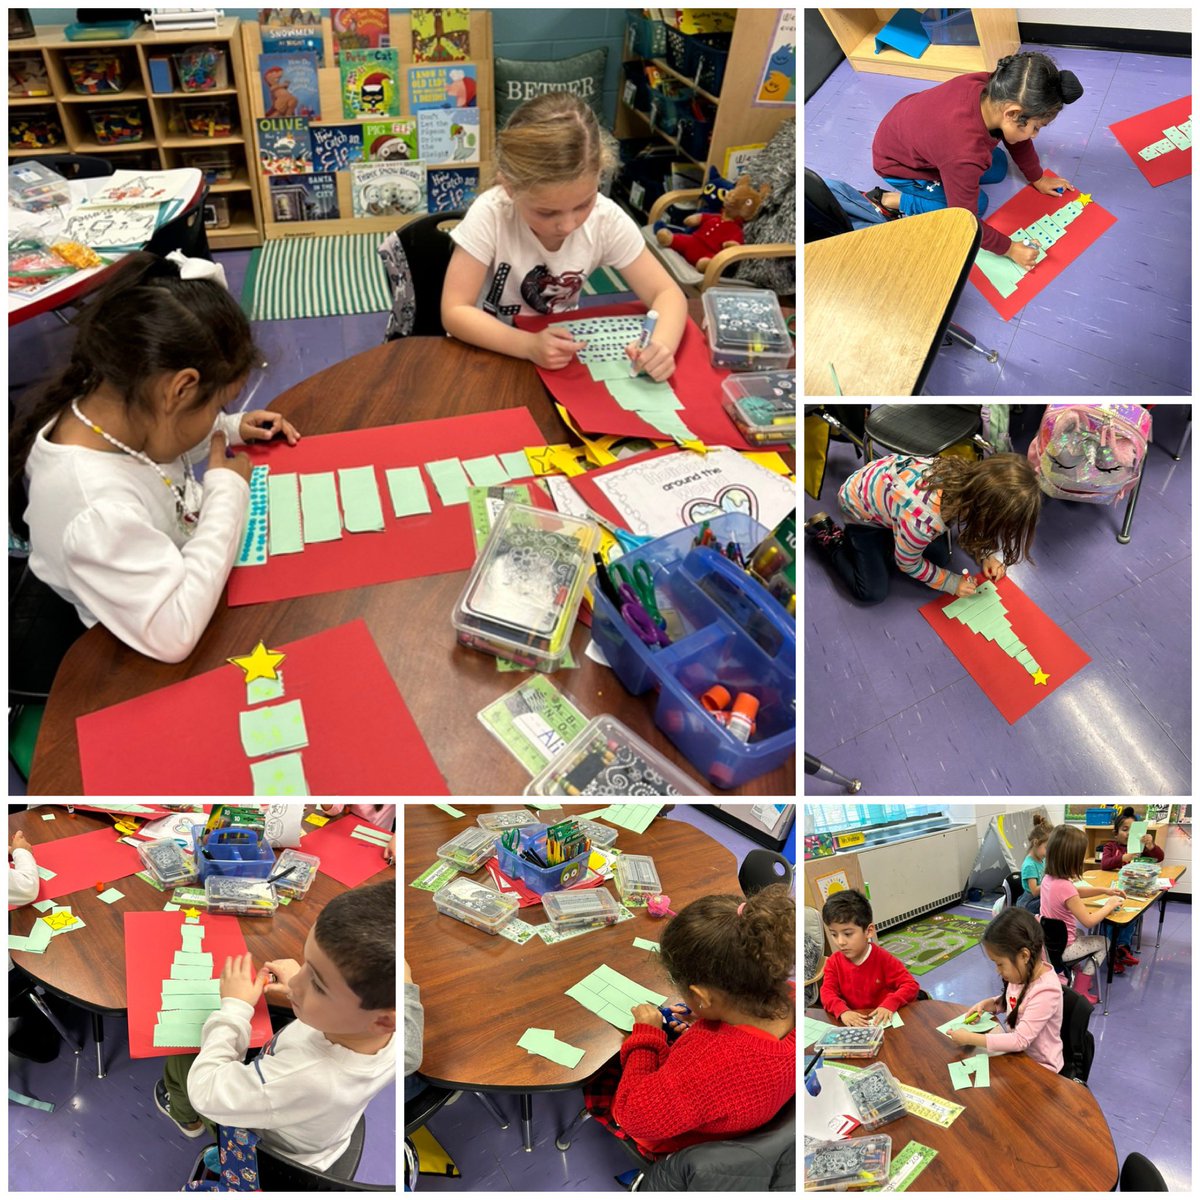 Busy math time in kindergarten. Started our measuring unit! 📏 Building Christmas trees by comparing length and going on a scavenger hunt to find objects longer and shorter than our string. #WEareLakota @HeritageECS ❤️🫶🏻